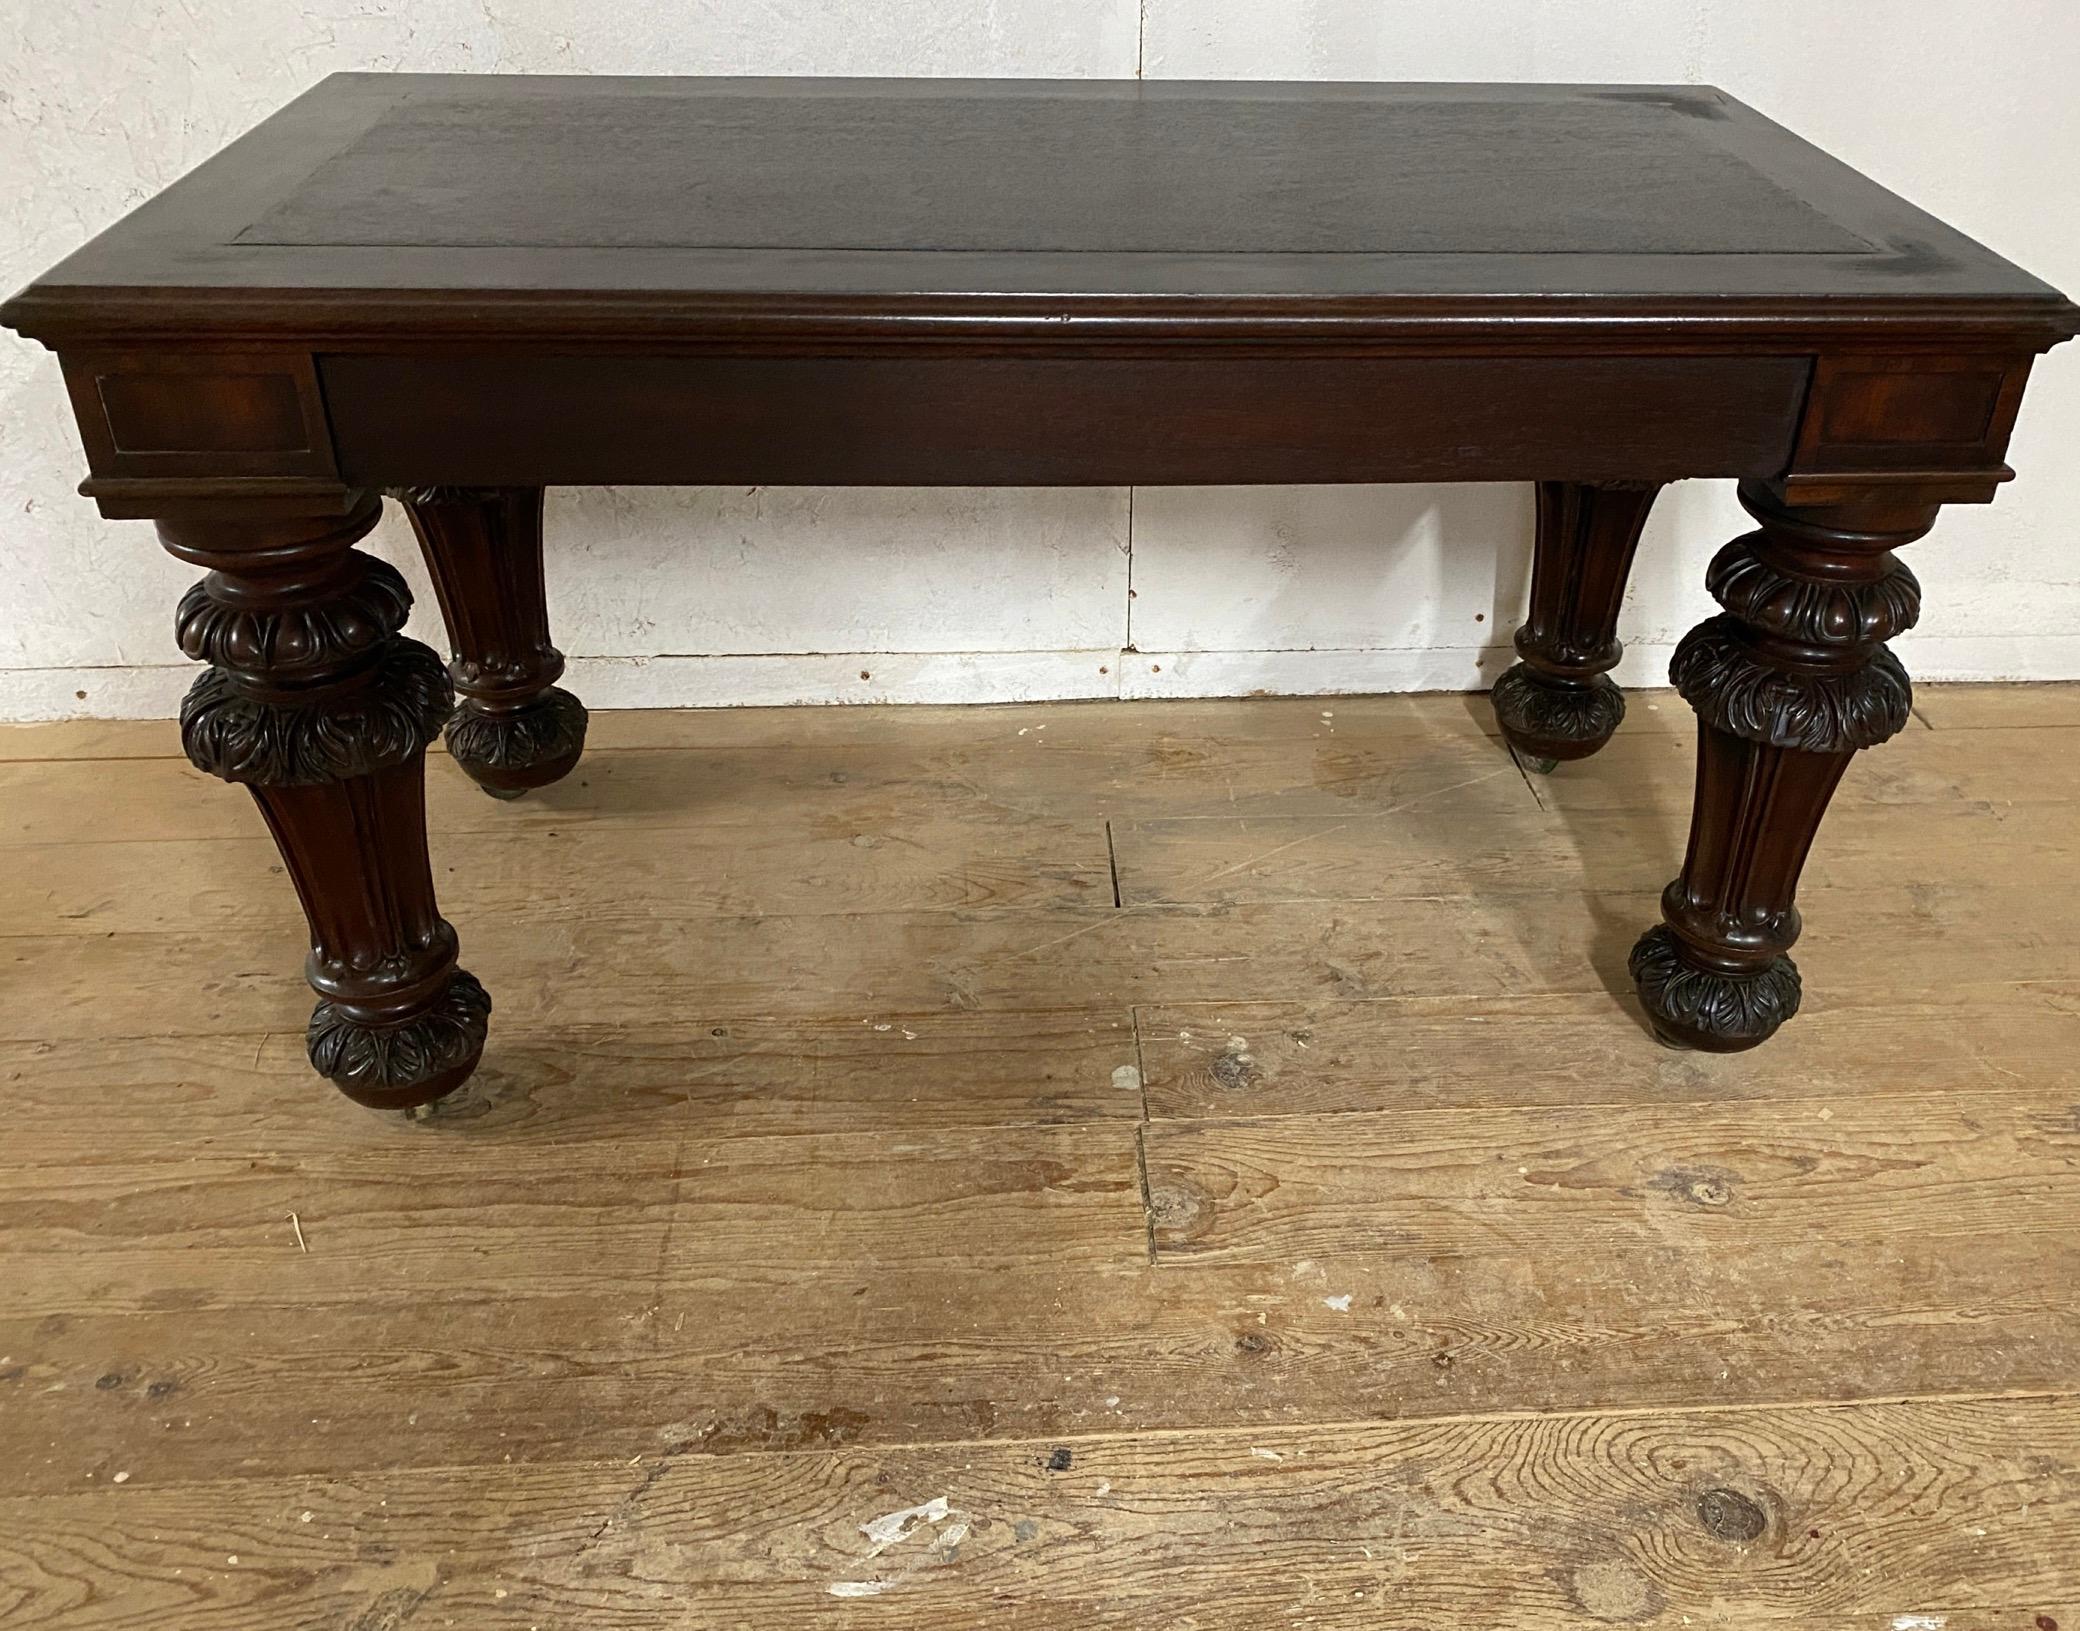 A very handsome and strong English Elizabethan Tudor style carved wood coffee table with bold baluster legs. Very sturdy and in excellent condition ready to use and enjoy.
Search terms: baroque coffee table, Italian renaissance coffee table,